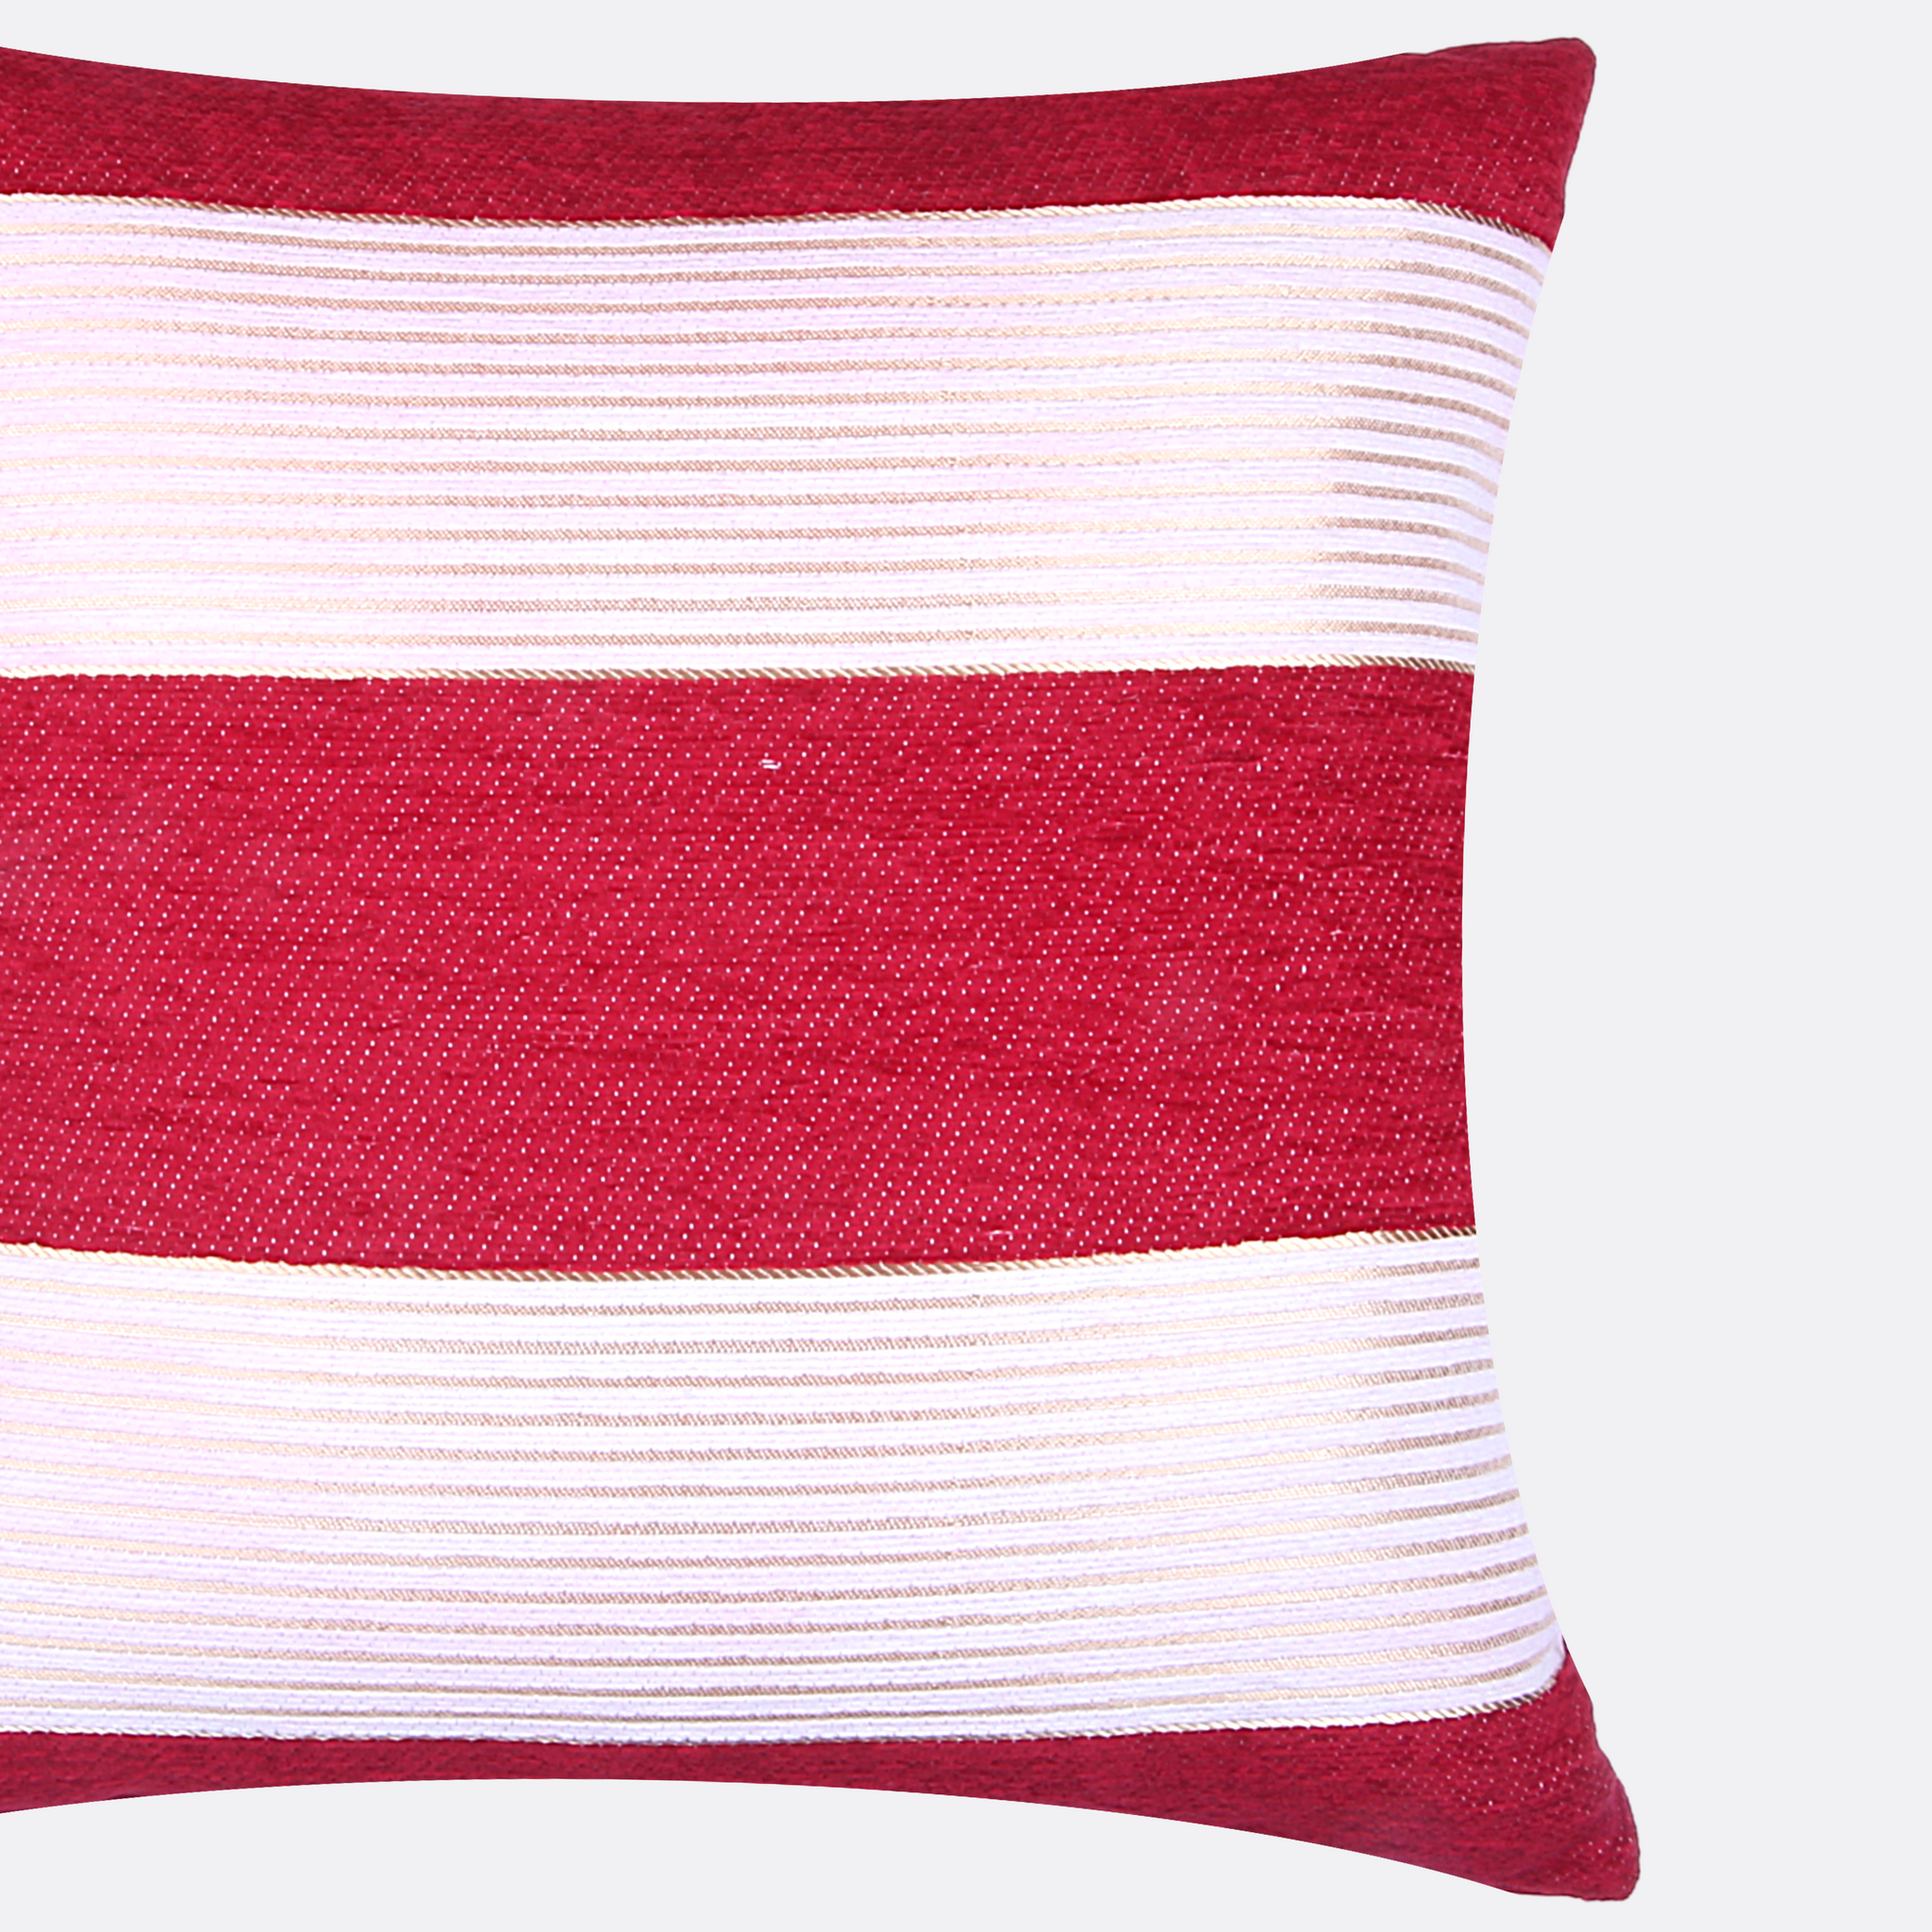 Smudge Cushion Cover